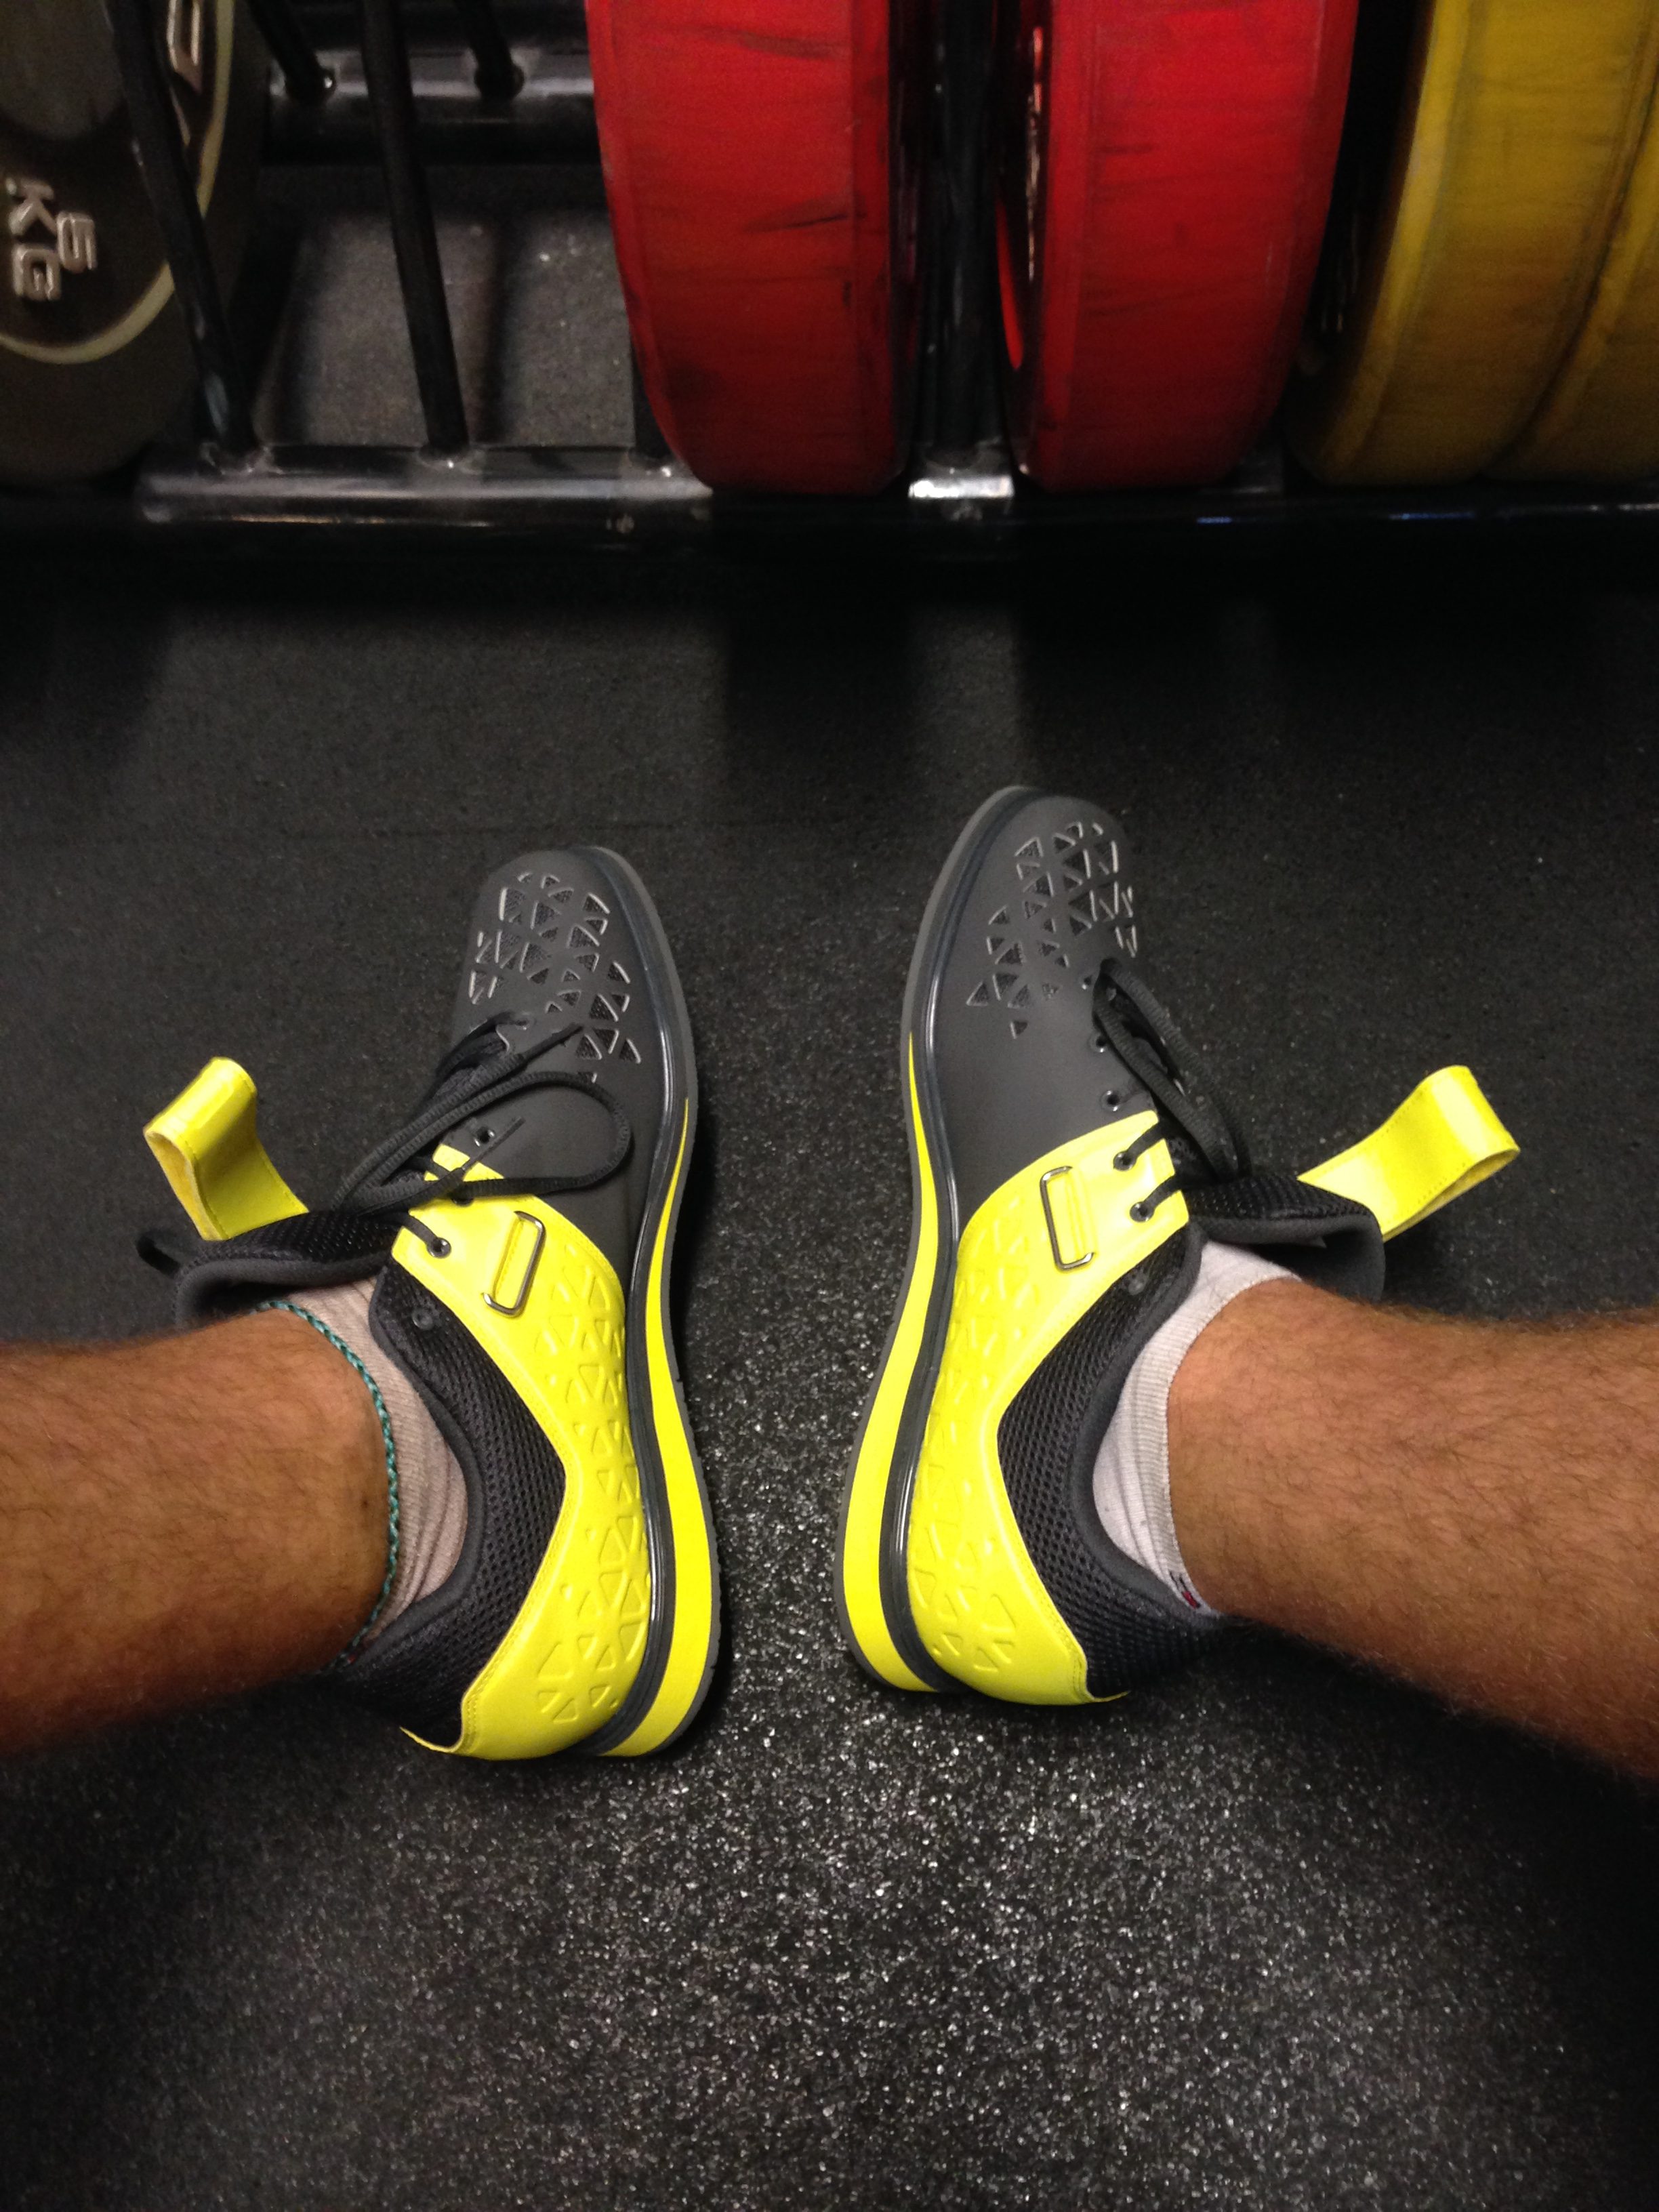 Olympic weightlifting: What I found after buying lifting shoes